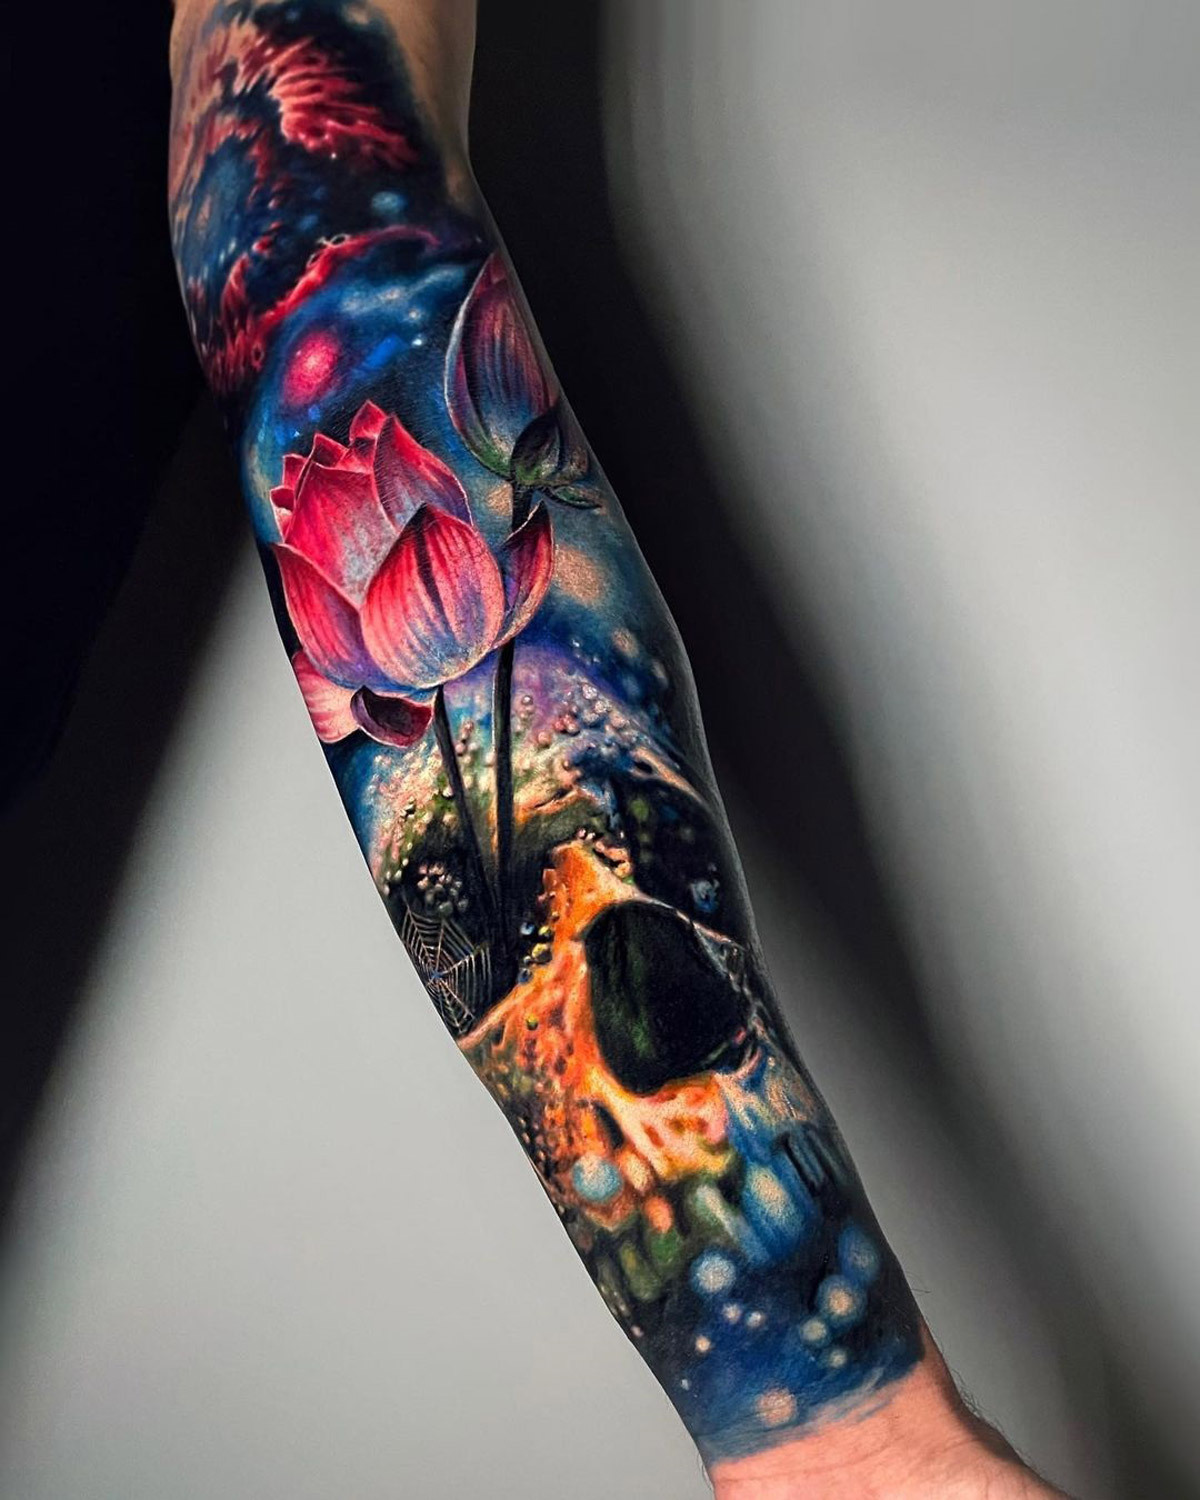 Galaxy Tattoo Ideas: 60+ Designs and Their Secret Meanings